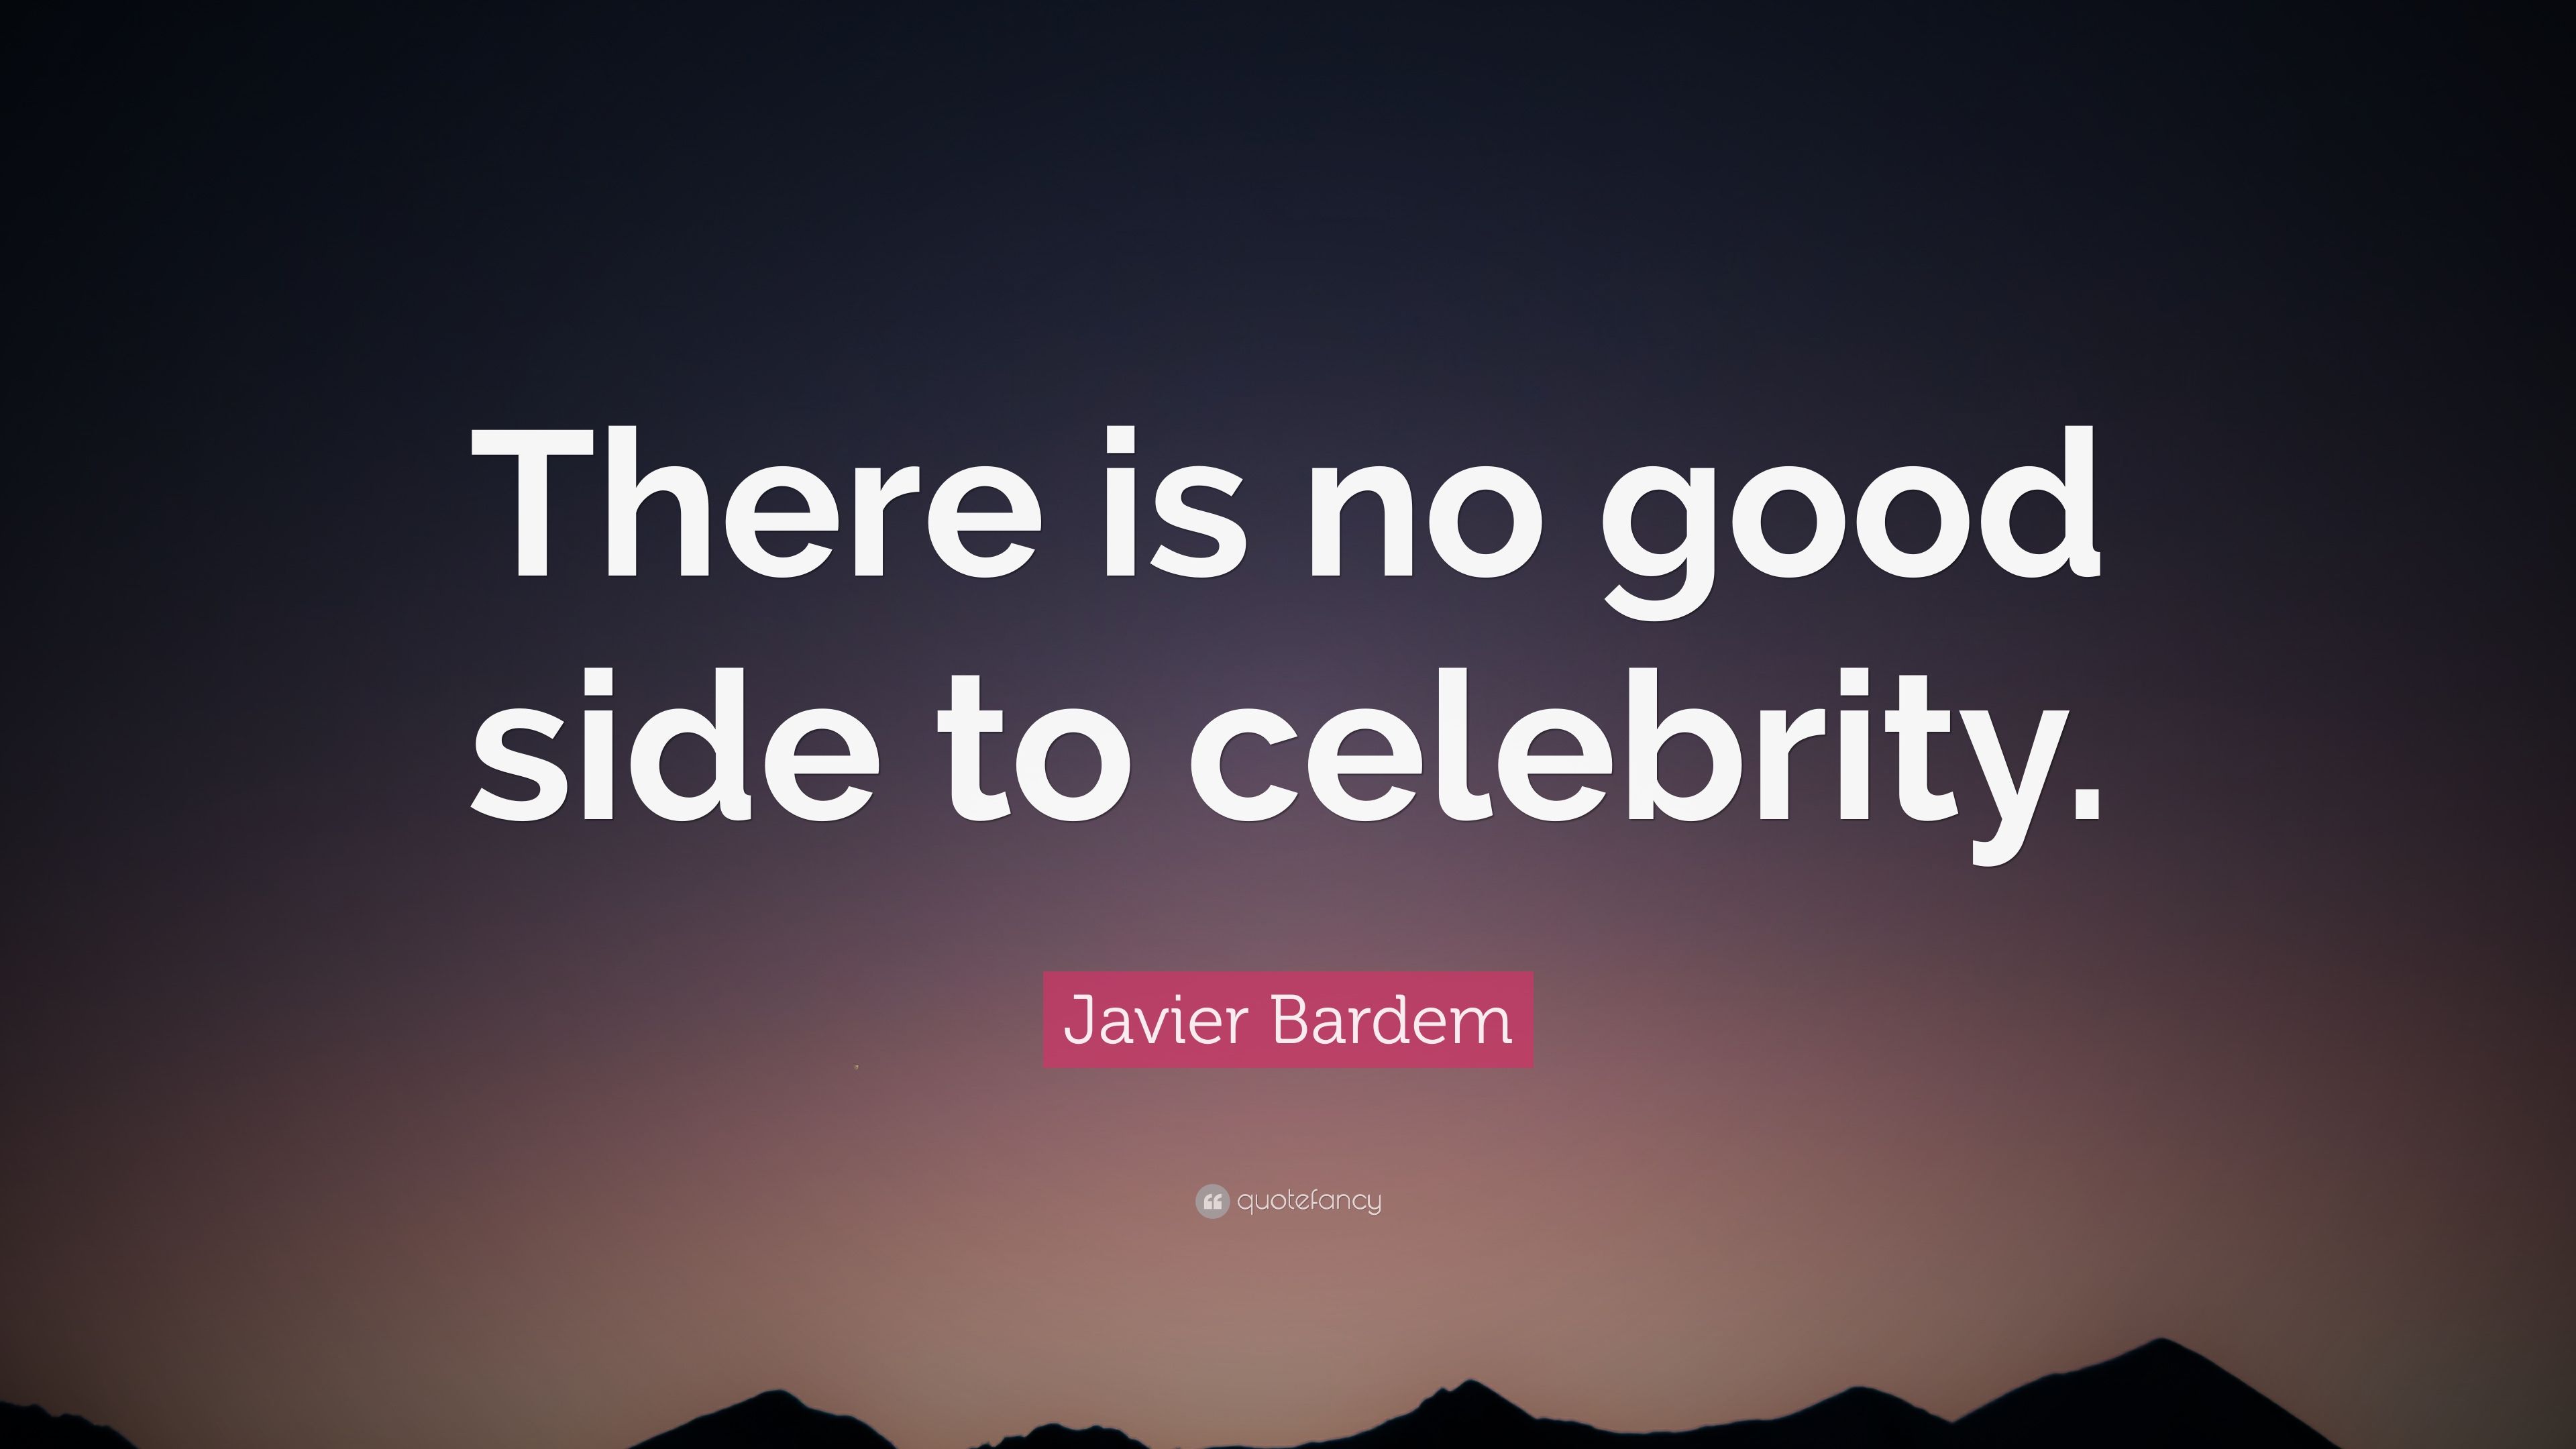 Javier Bardem Quote: “There is no good side to celebrity.” 7